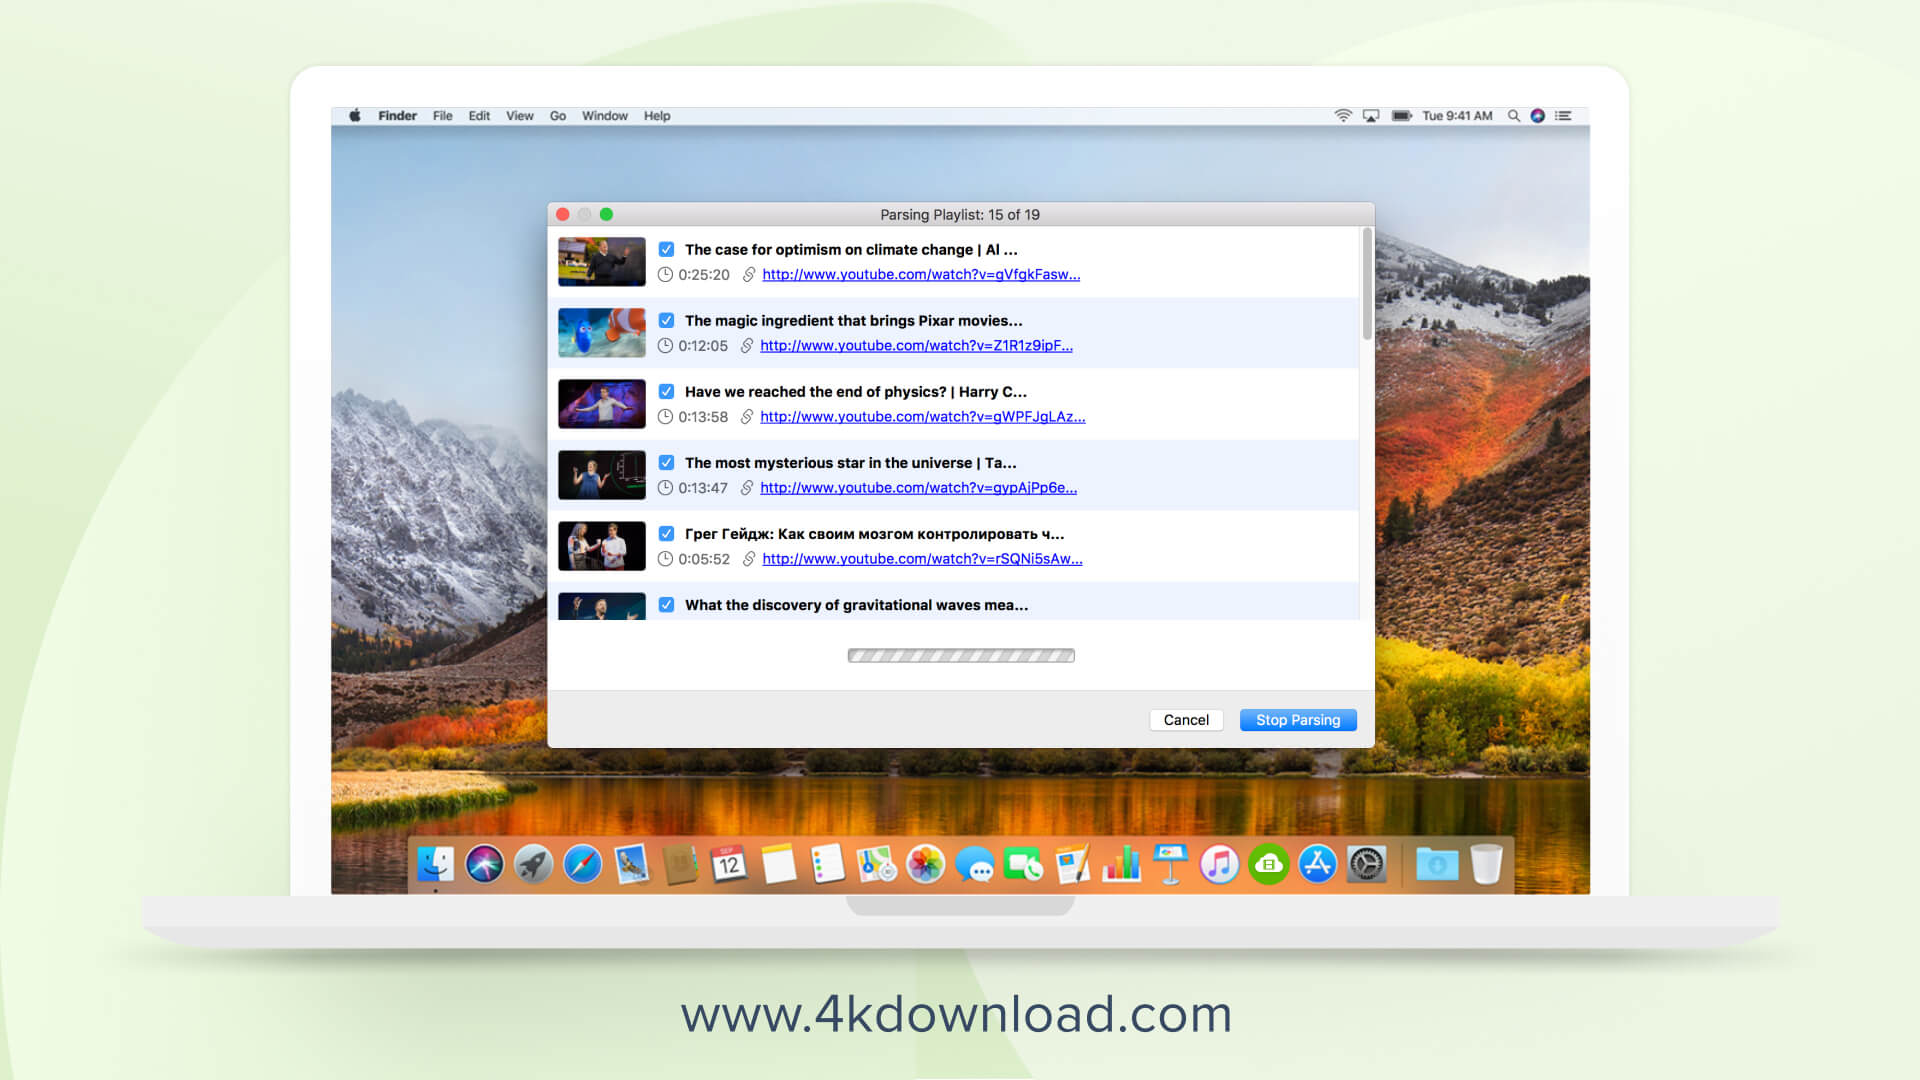 How To Download Videos From Popular Streaming Sites Using 4K Downloader -  MacTrast